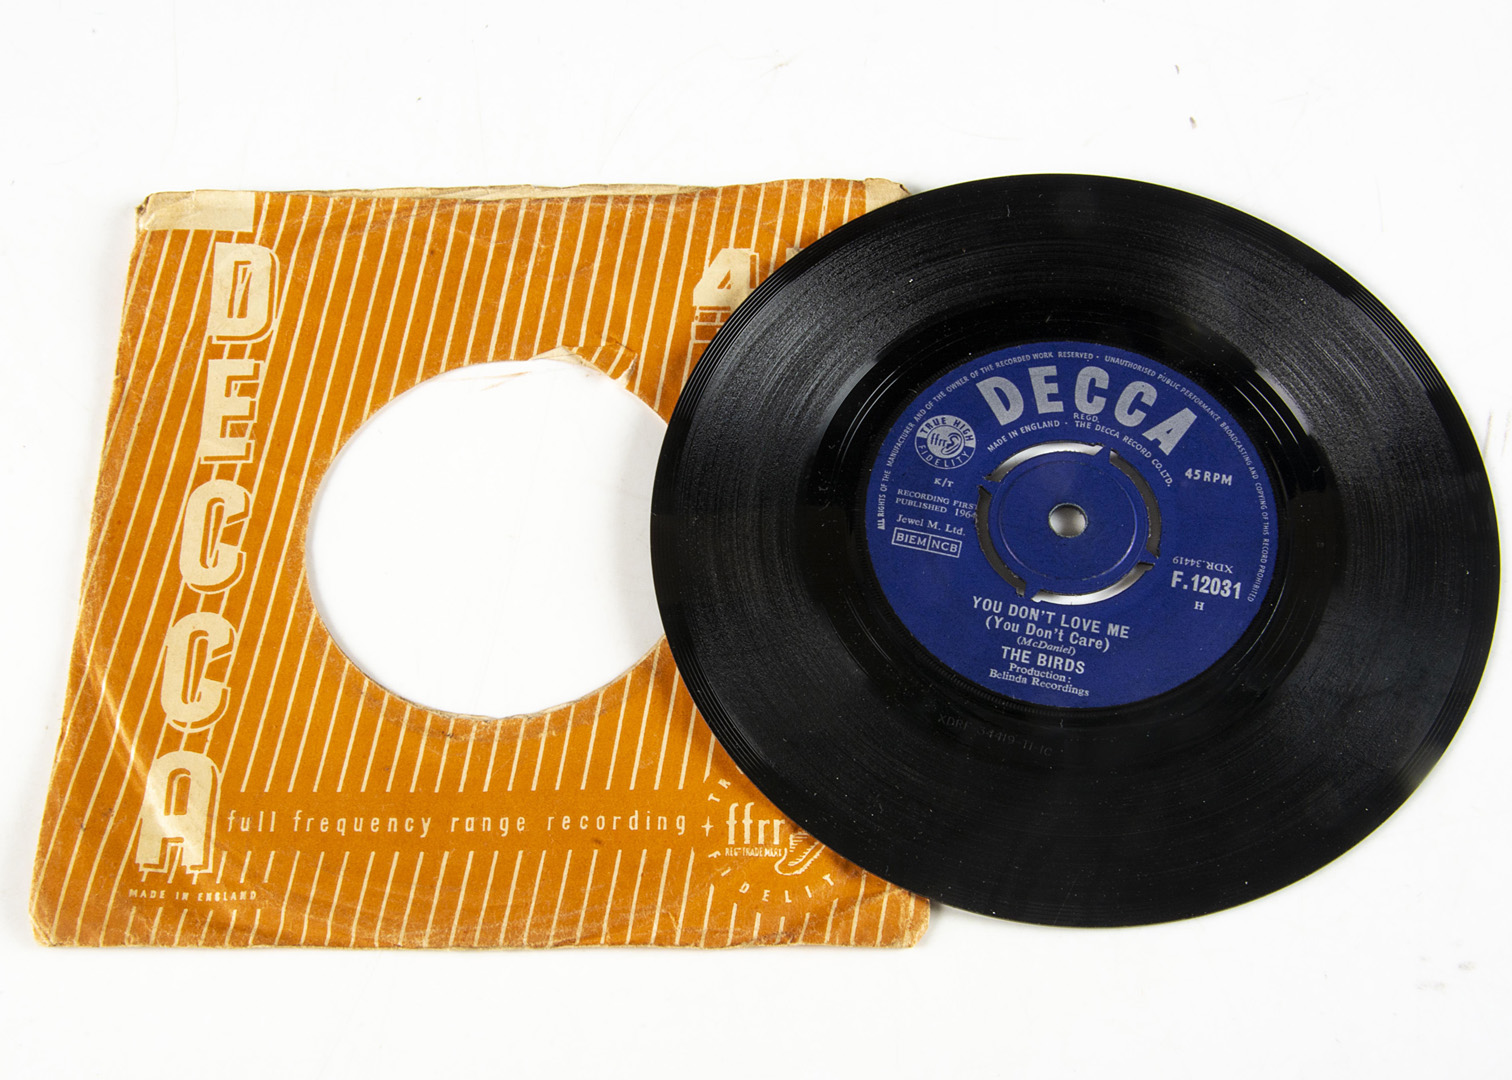 The Birds 7" Single, You're On My Mind b/w You Don't Love Me - Original UK release 1964 on Decca ( - Image 2 of 2